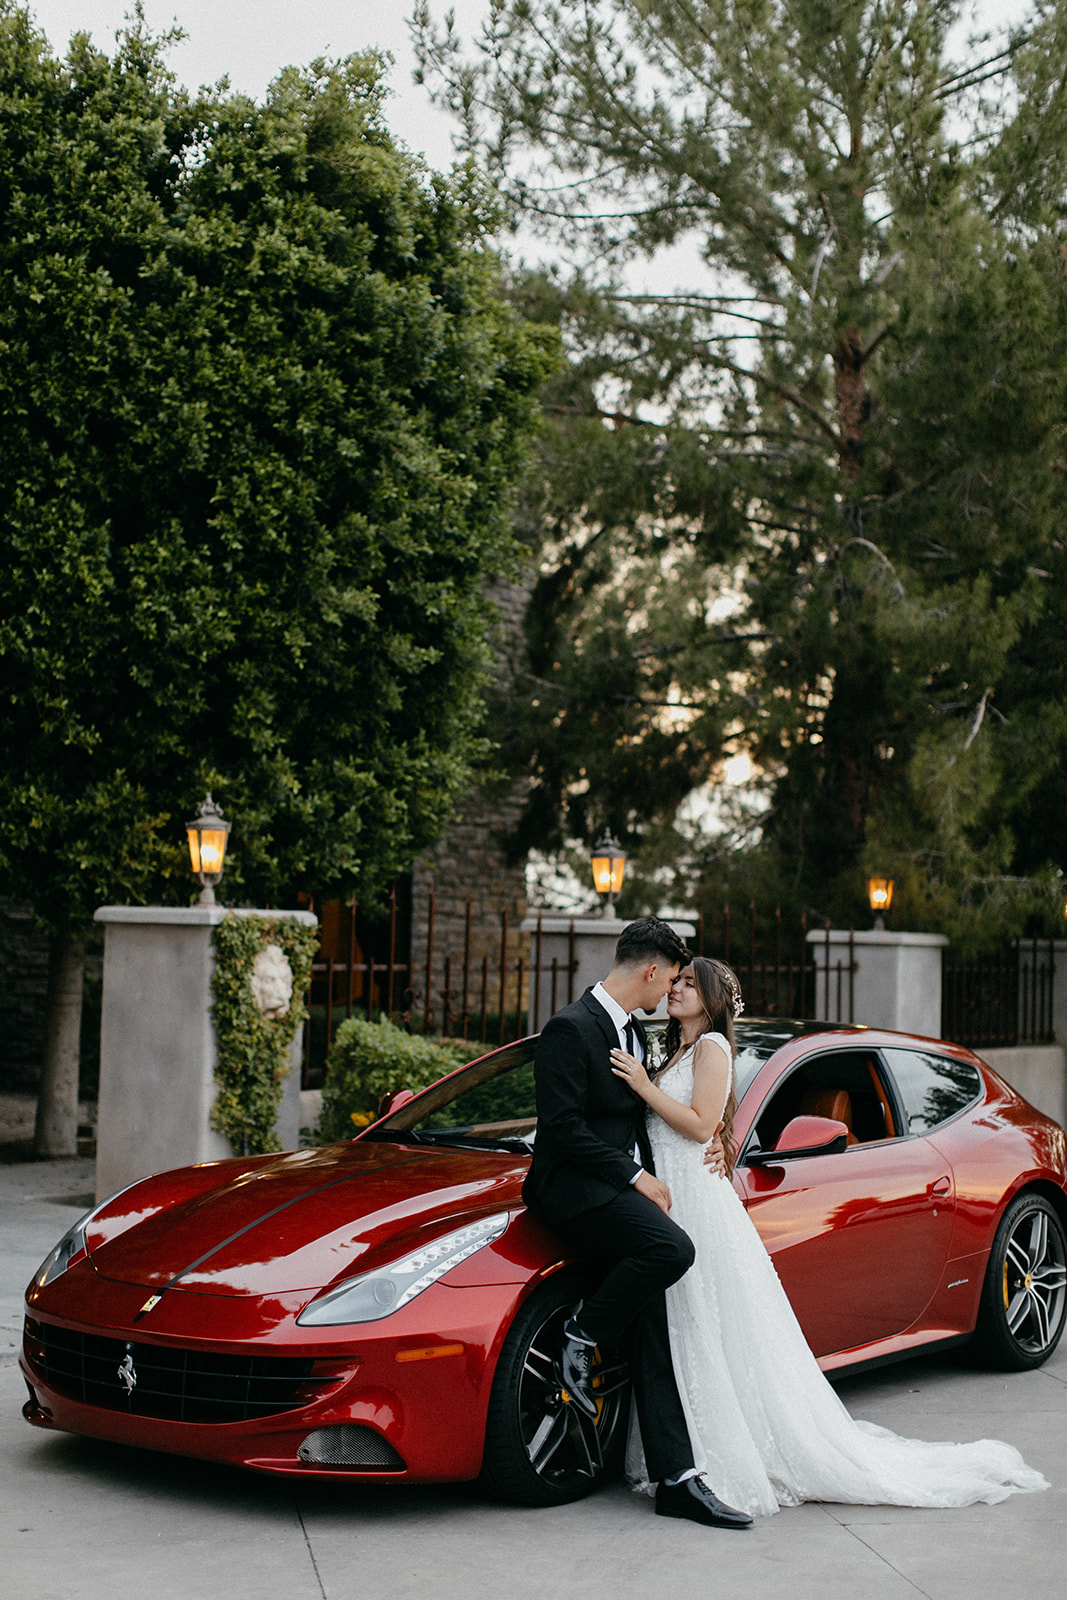 The Ashley castle chandler bride and groom posing with car